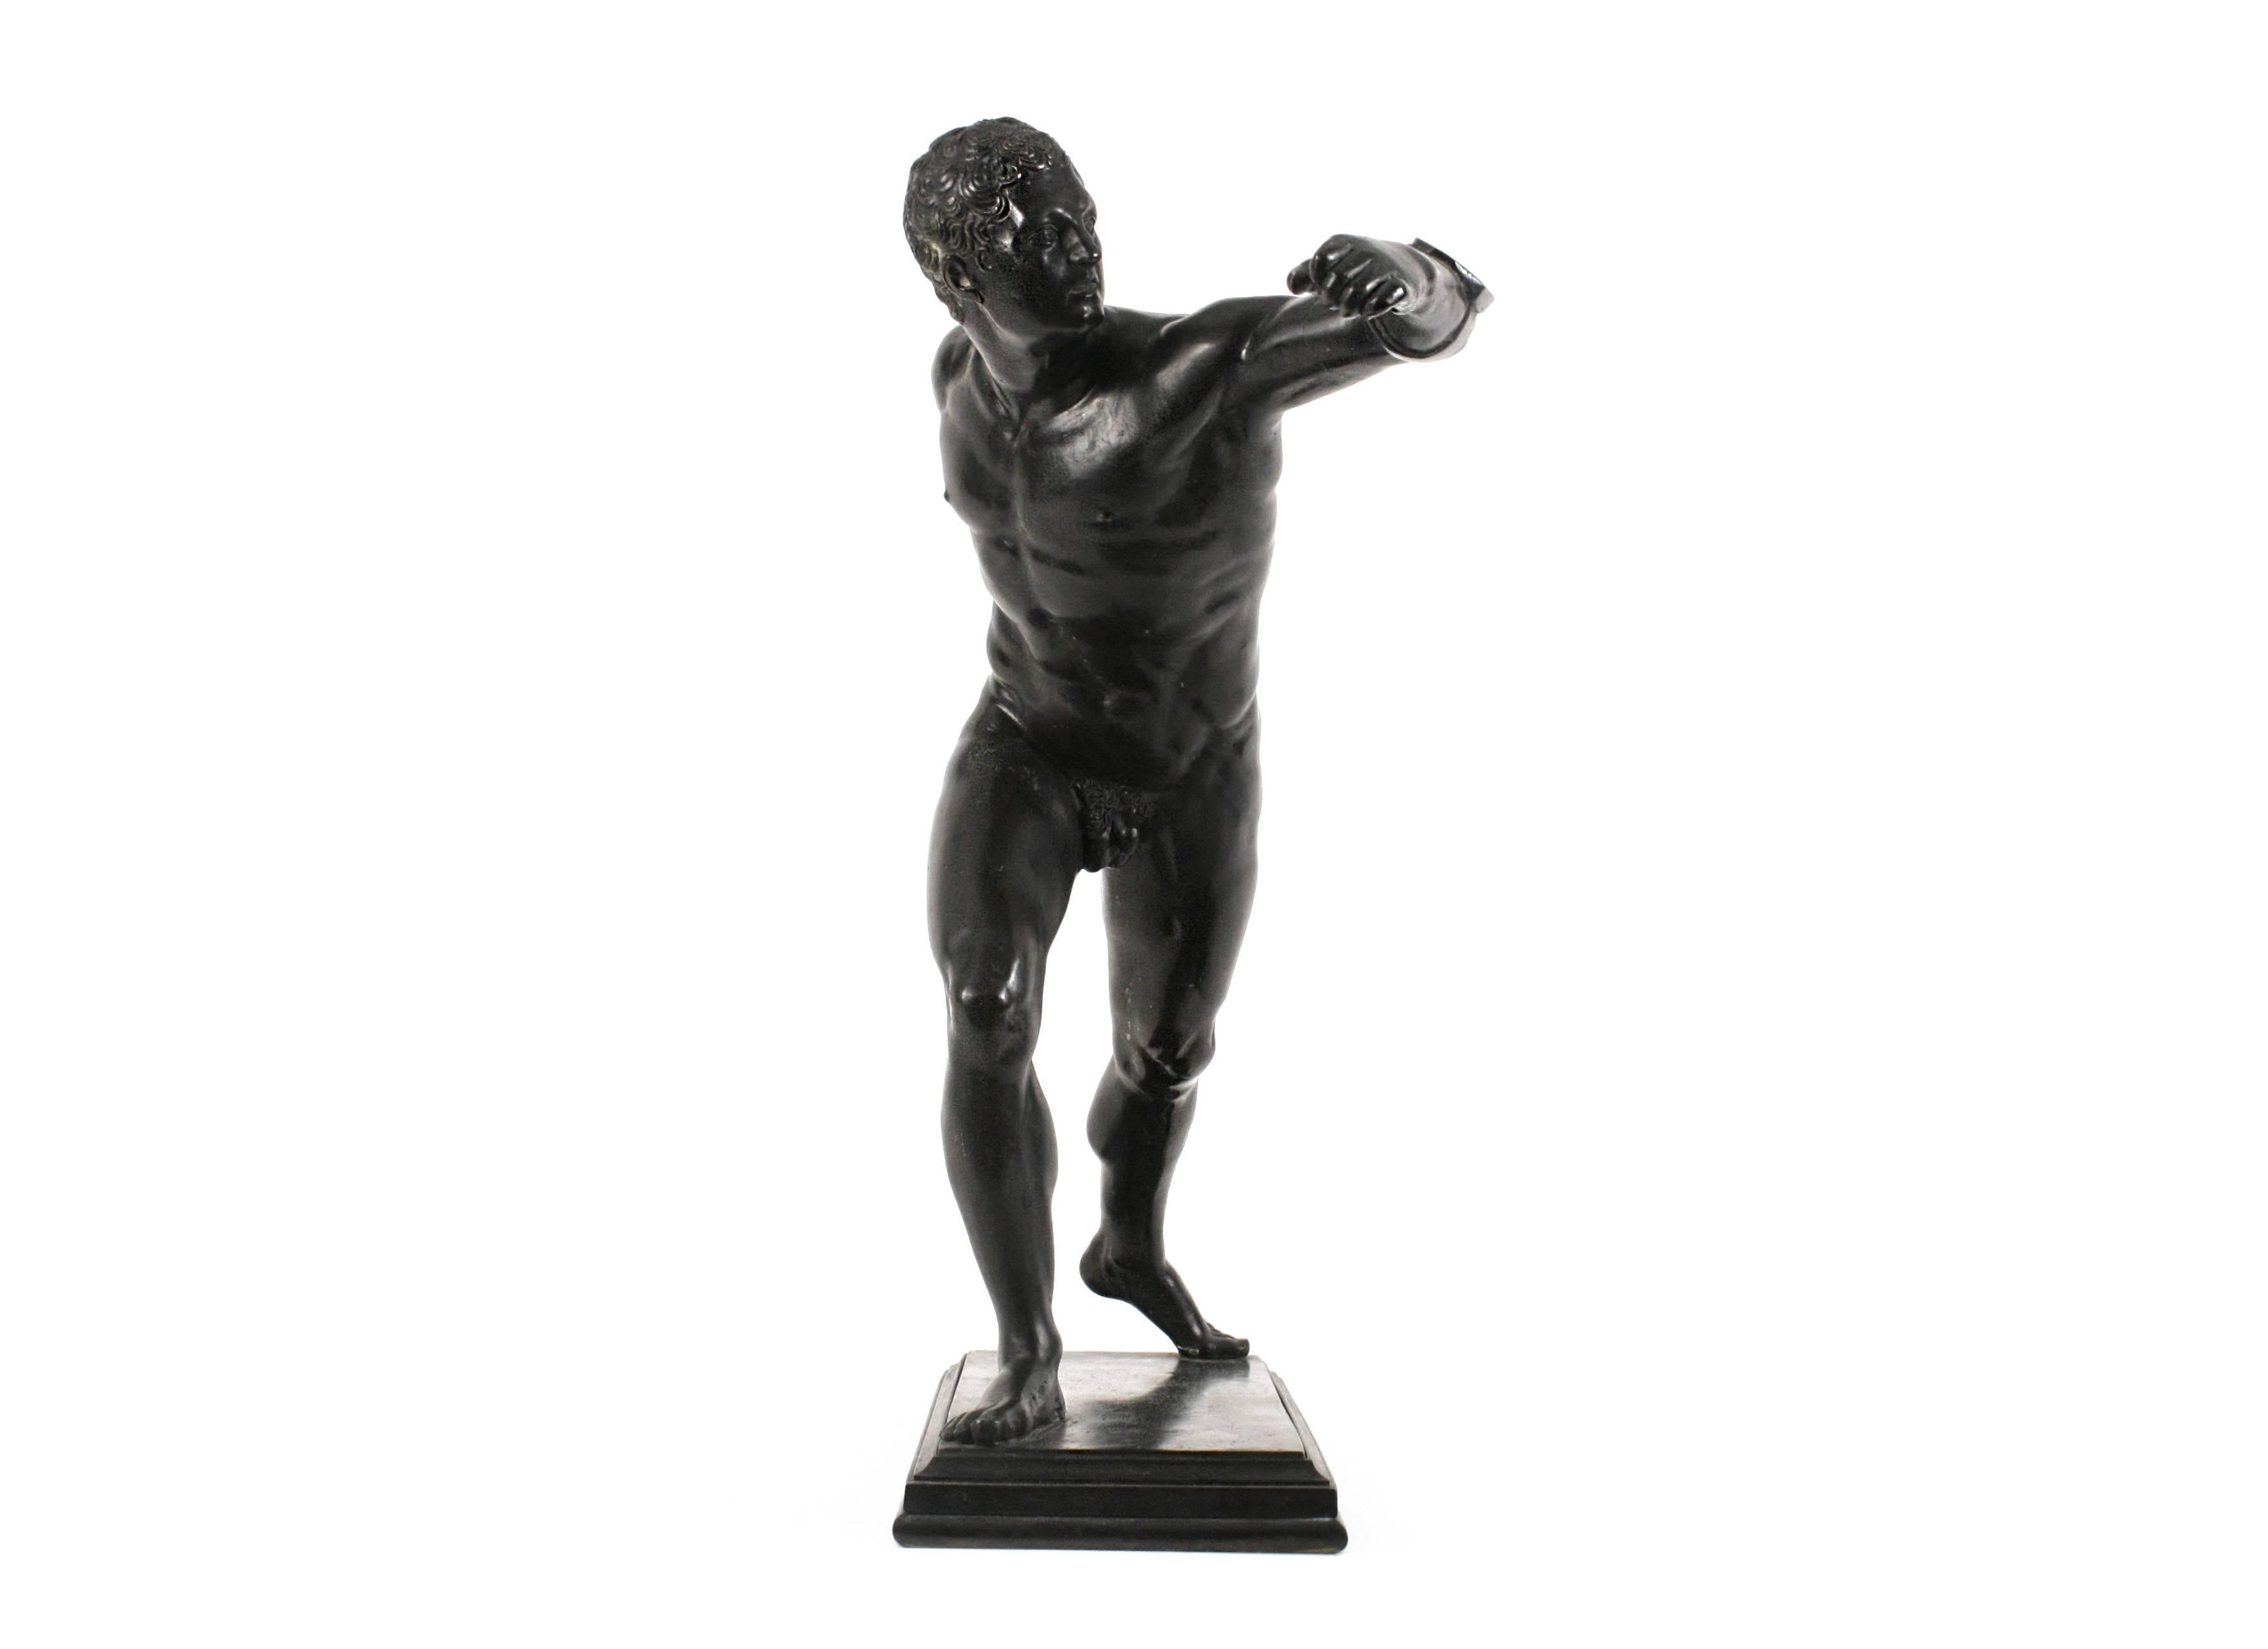 Borghese Gladiator, after the antique
large patinated bronze sculpture
Italy, 19th Century
H 20 in. (50.8 cm)

Original marble sculpture was found in the early 1600's in the Anzio south of Rome, among ruins of a seaside palace belonging to Emperor